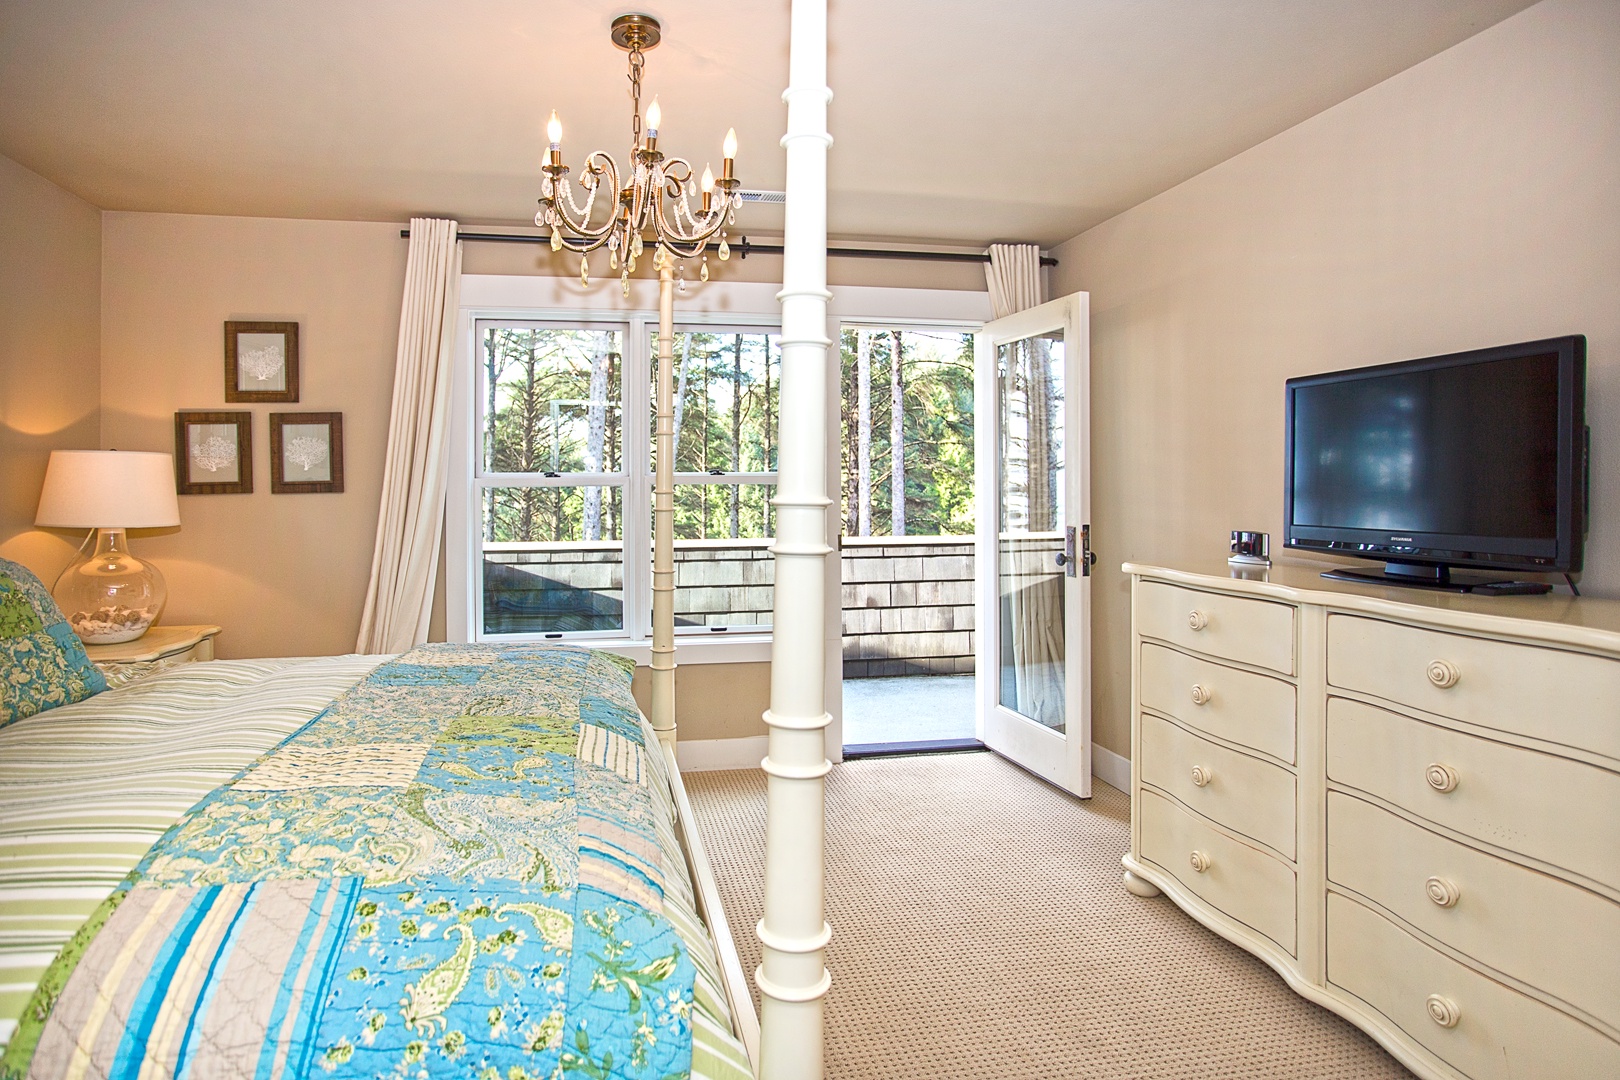 Second Floor - Primary King Suite with private balcony, flat screen TV